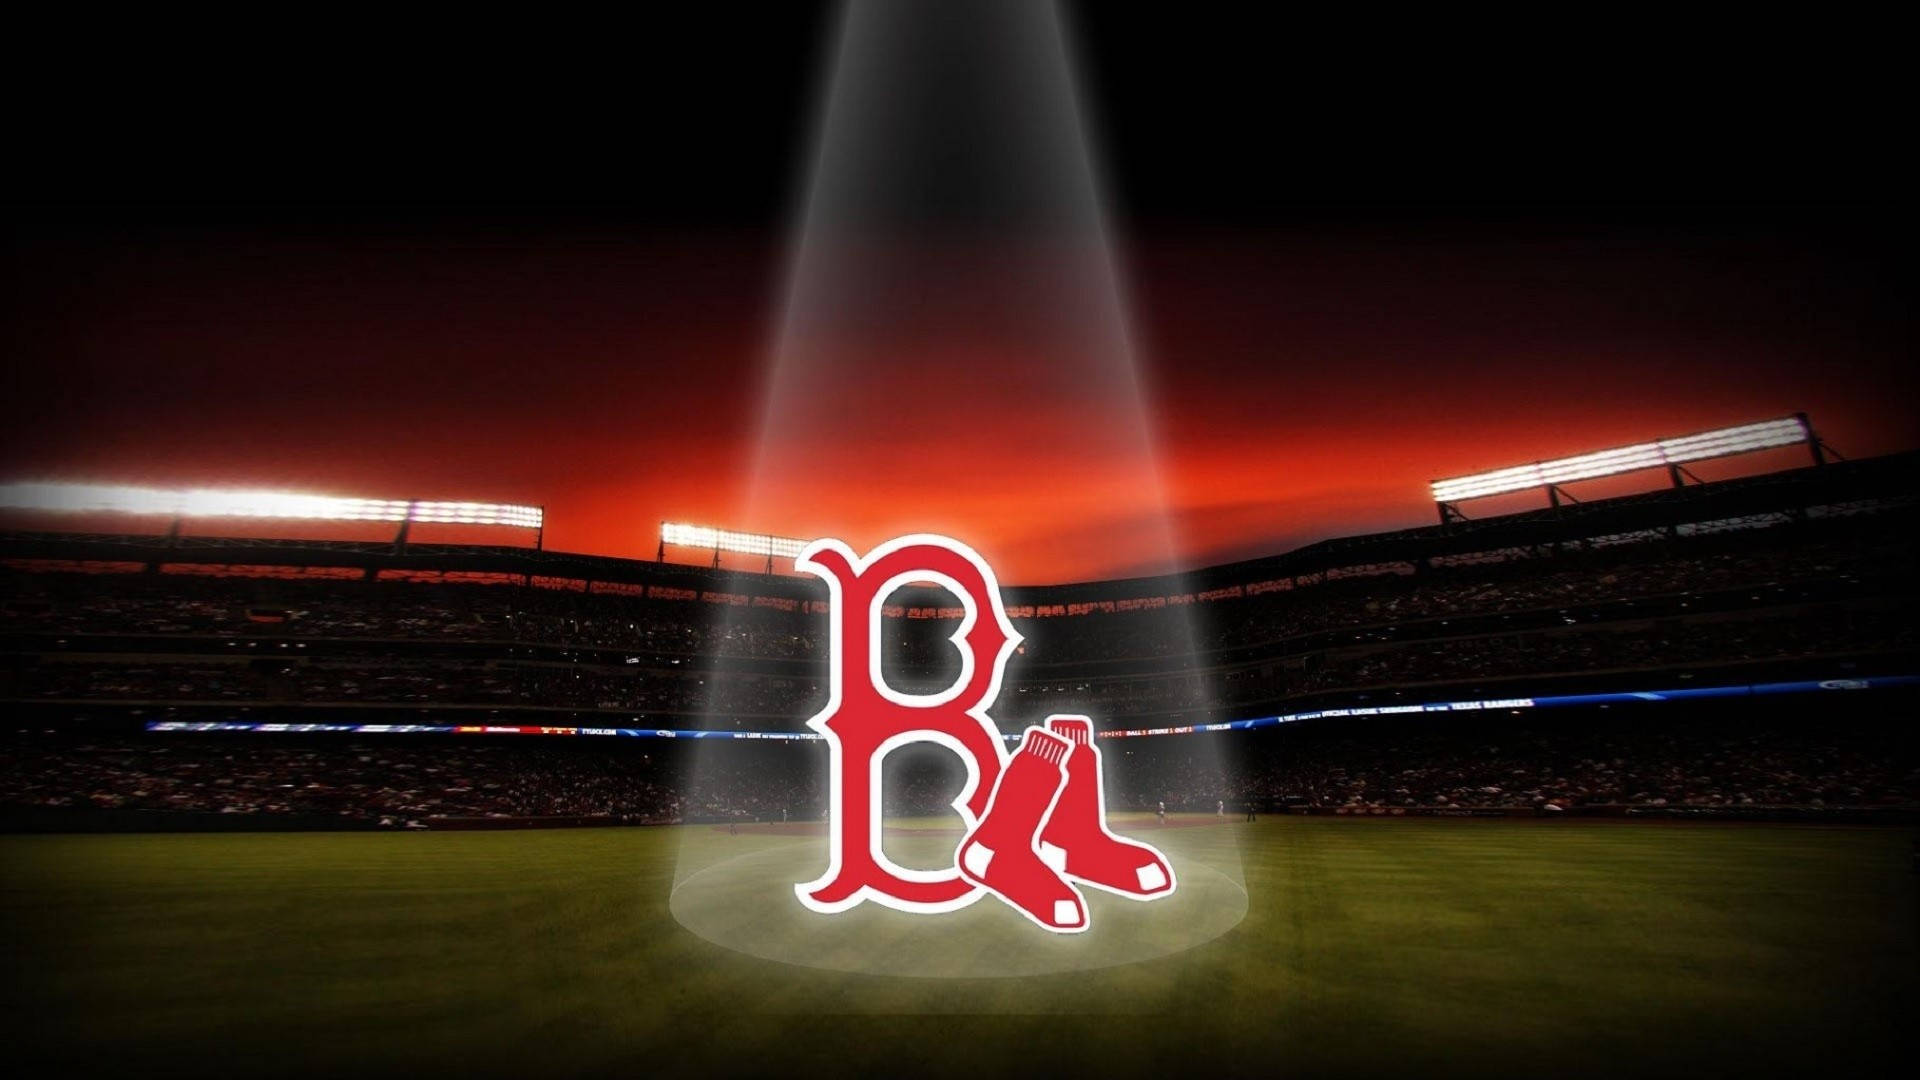 1920X1080 Boston Red Sox Wallpaper and Background